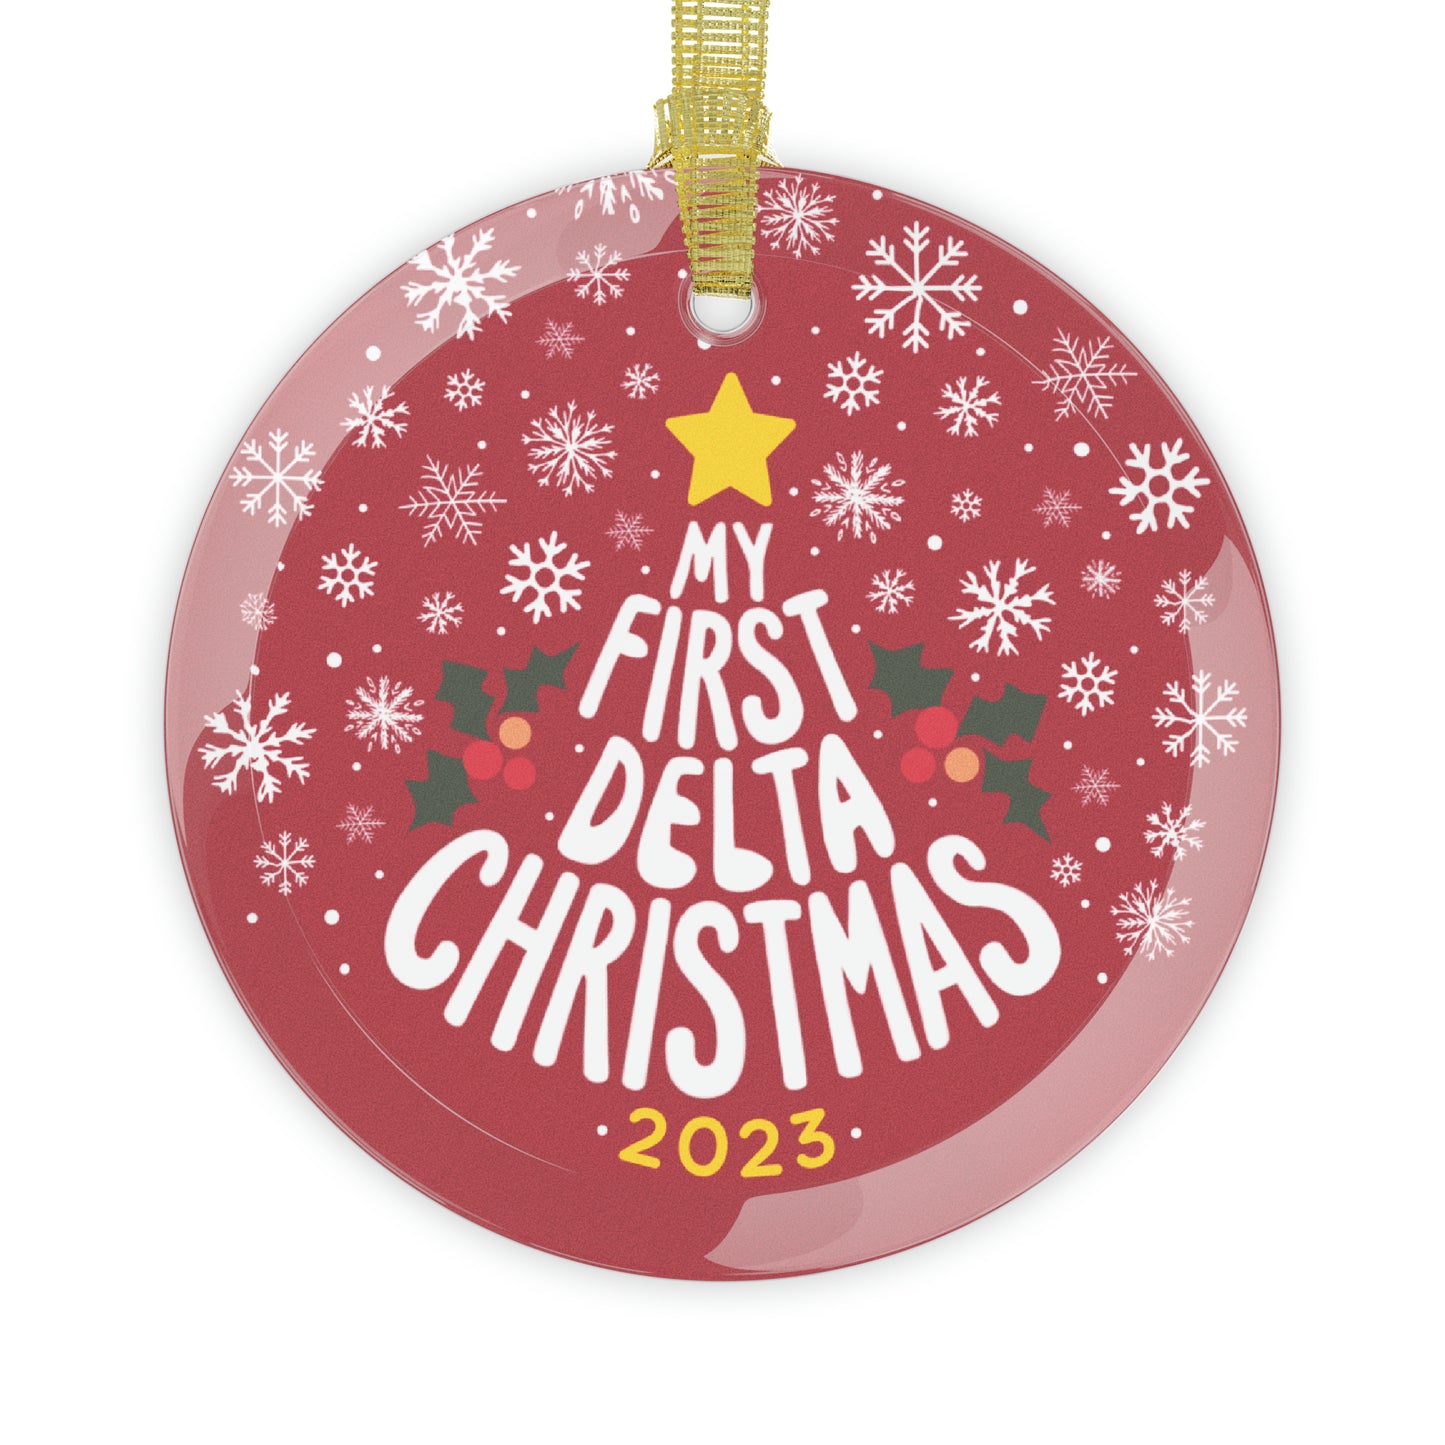 My First Delta Christmas 2023 - Glass Holiday Ornament